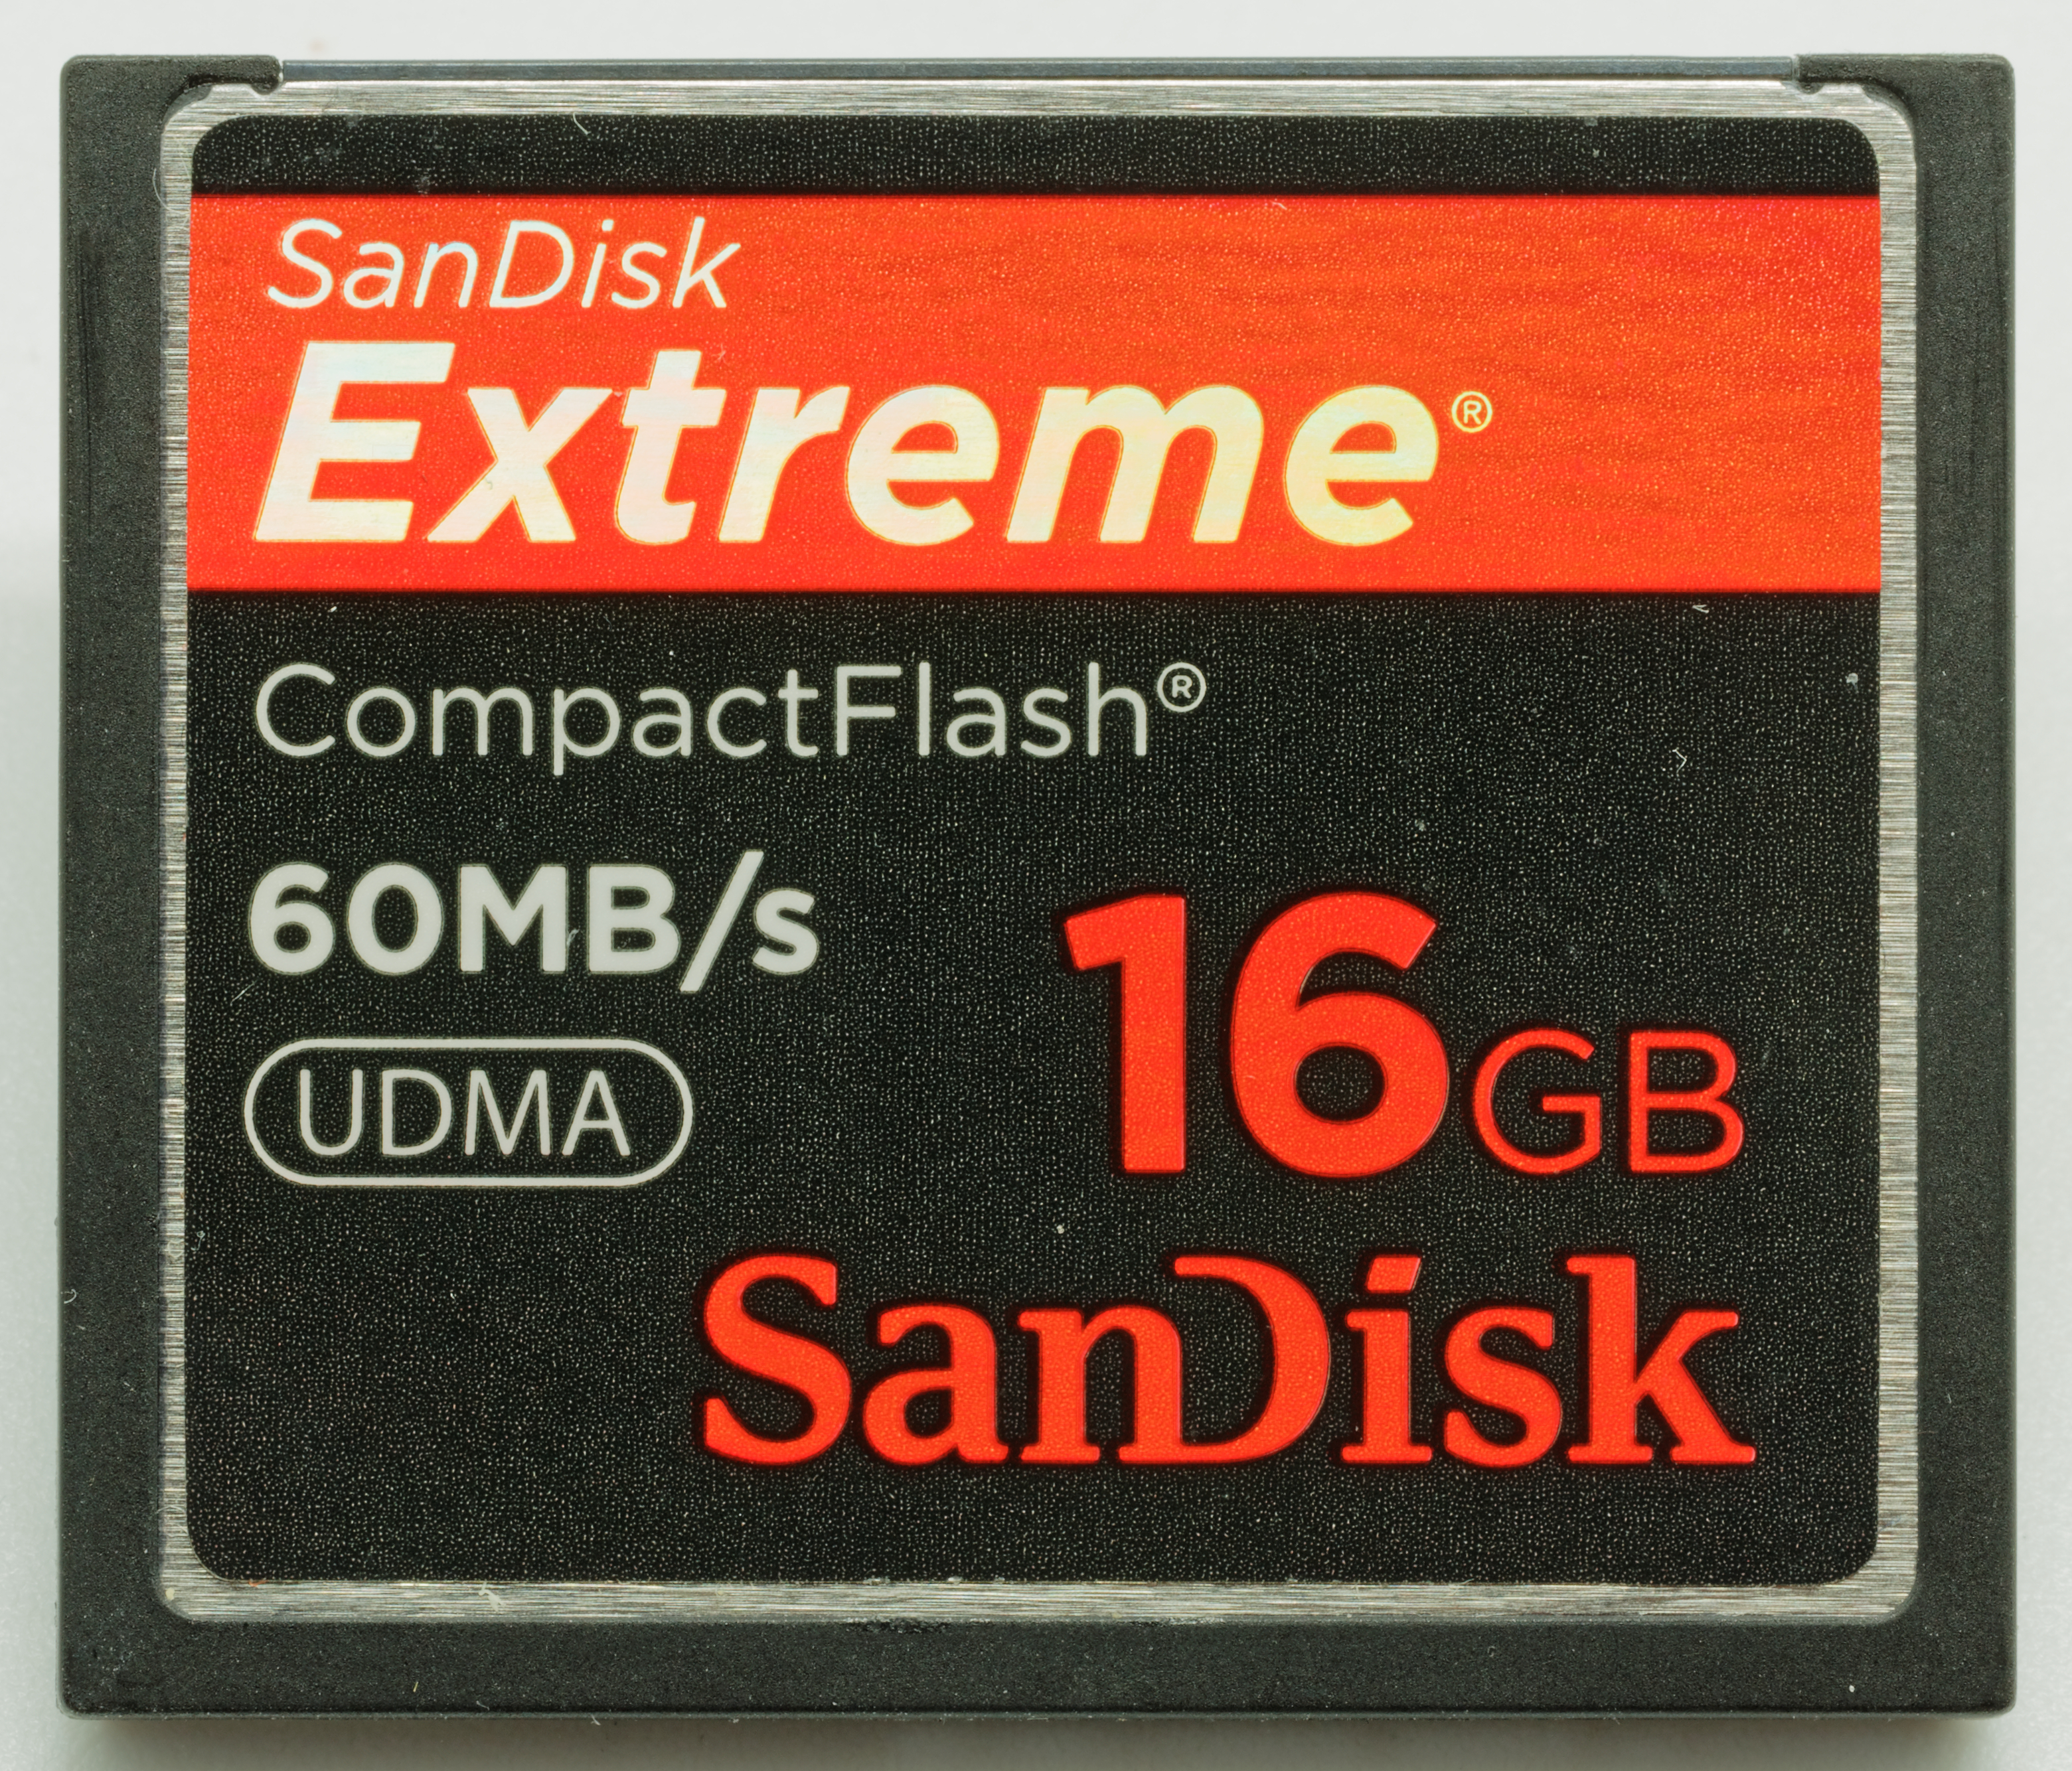 SANDISK Extreme CompactFlash card 16 GB 60 MBs - 2015 - 002